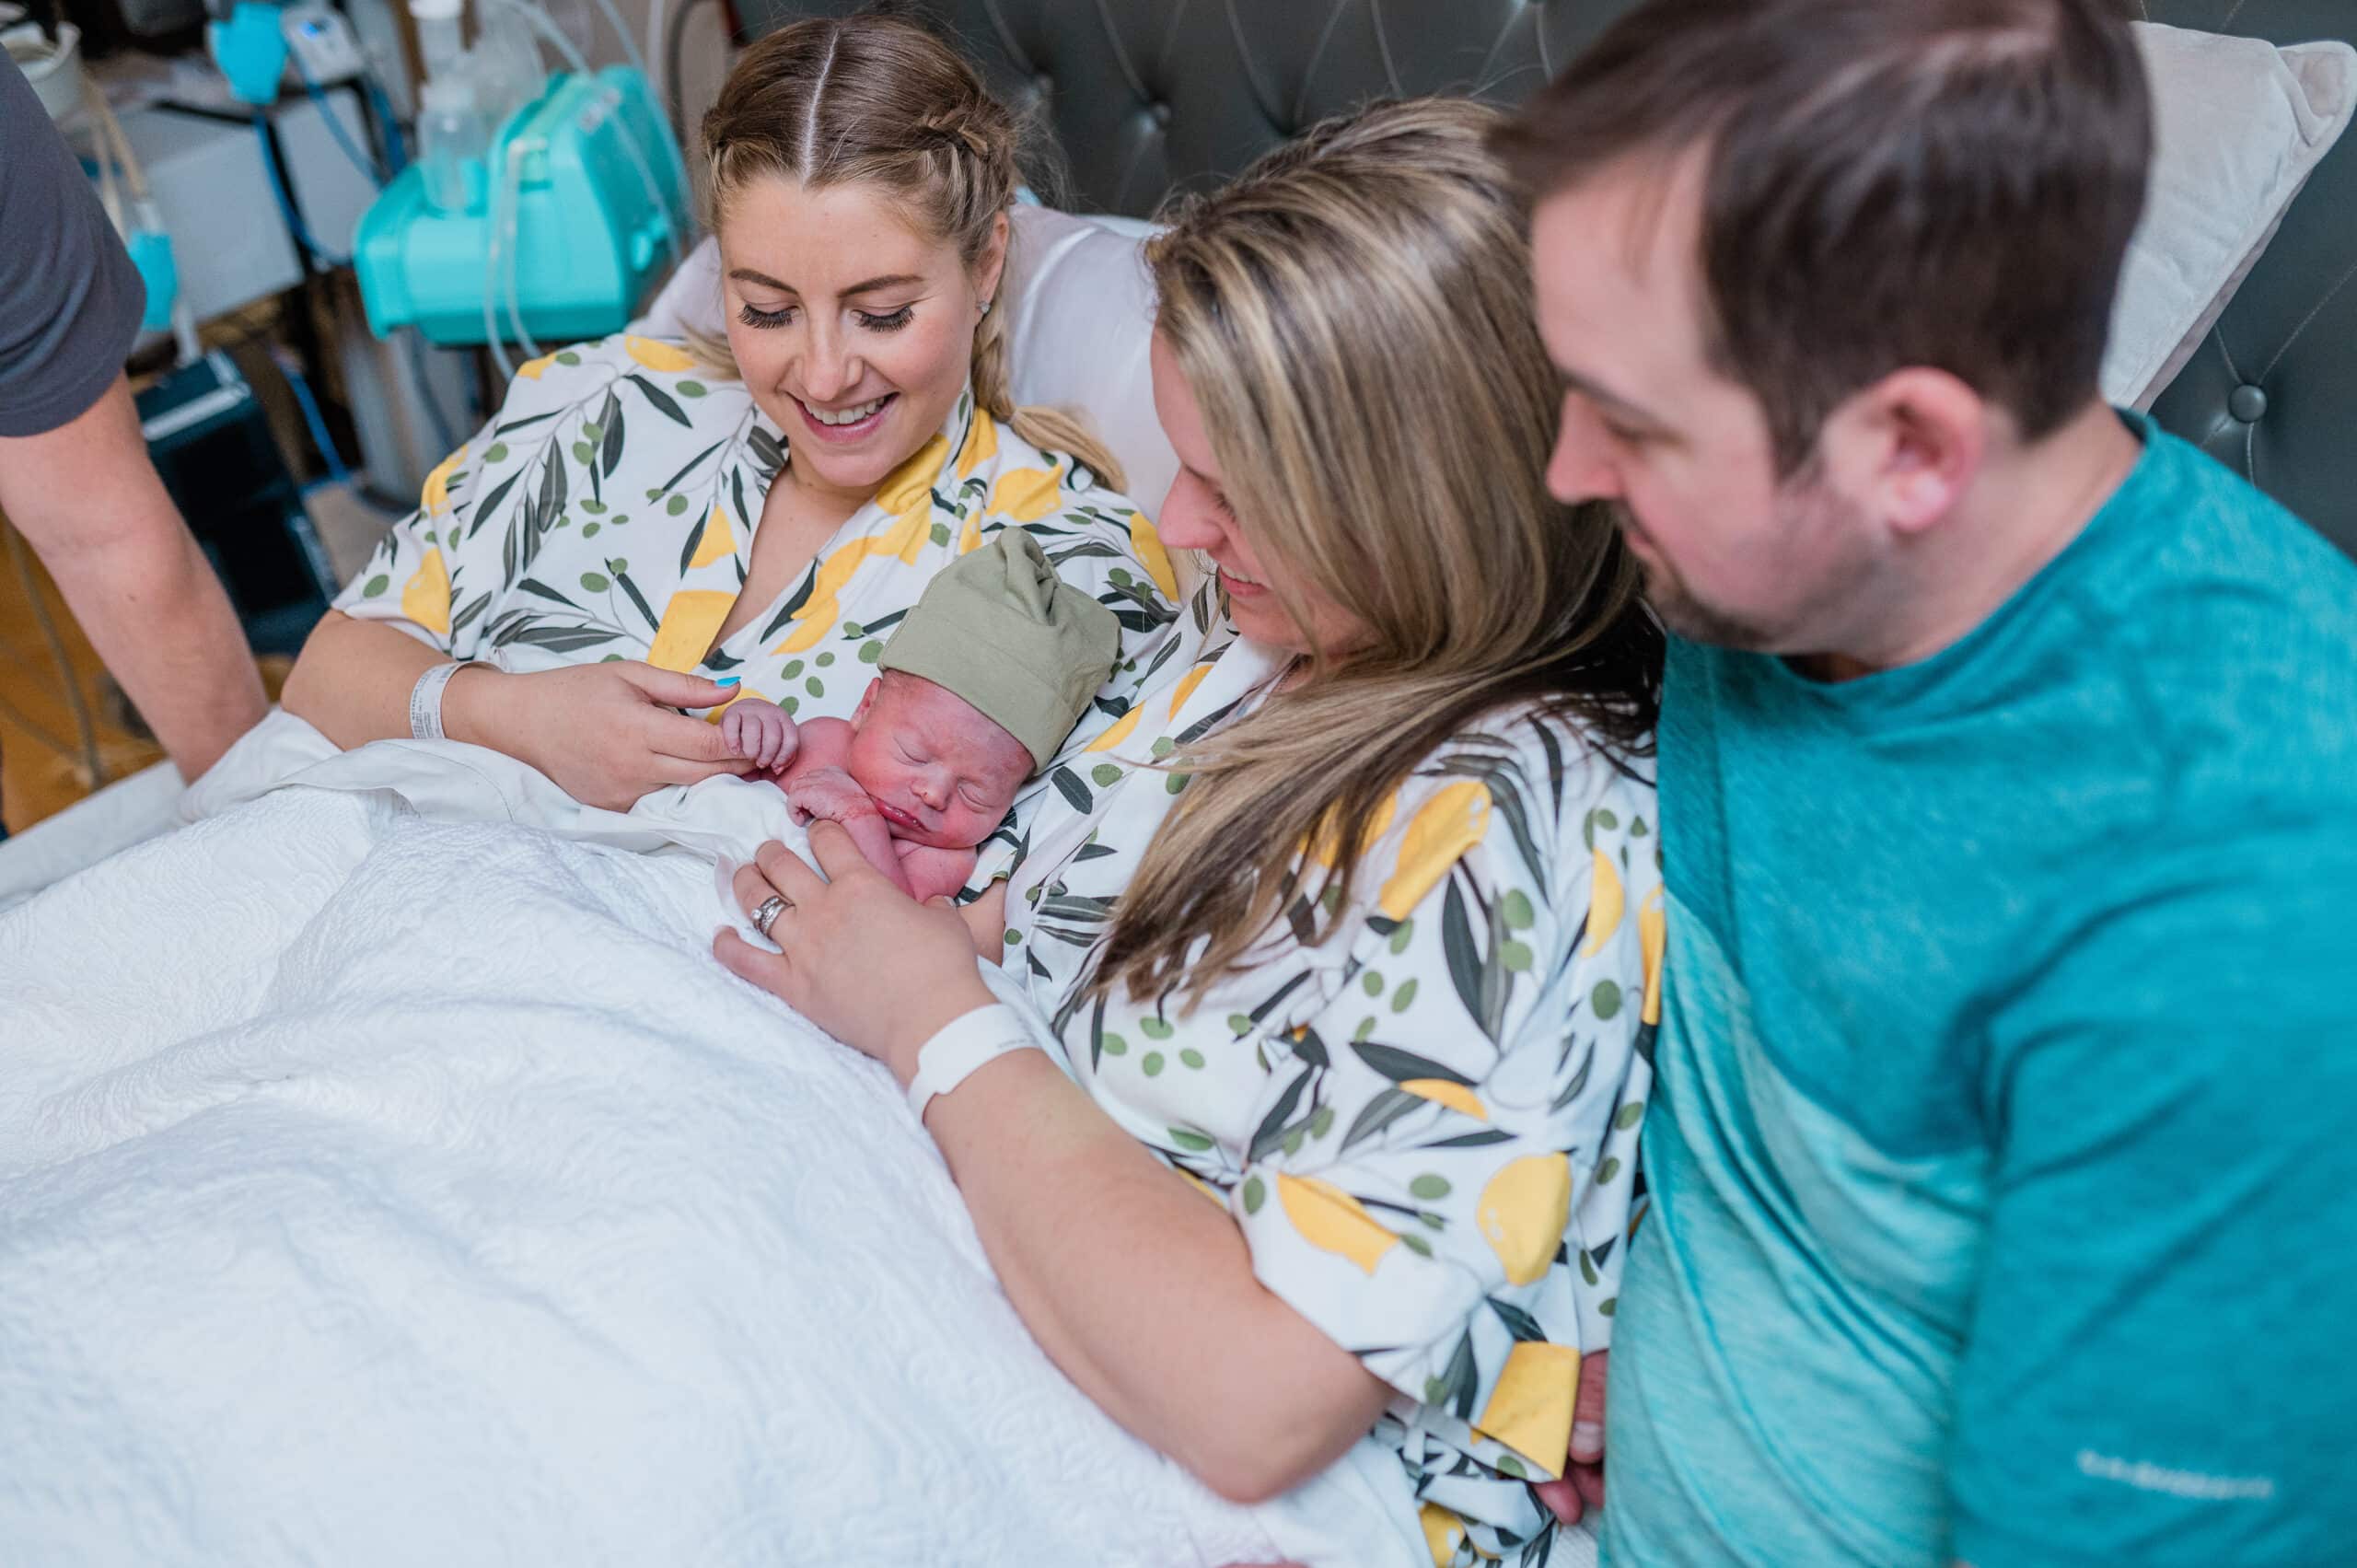 Two women in matching hospital gowns hold a baby between them